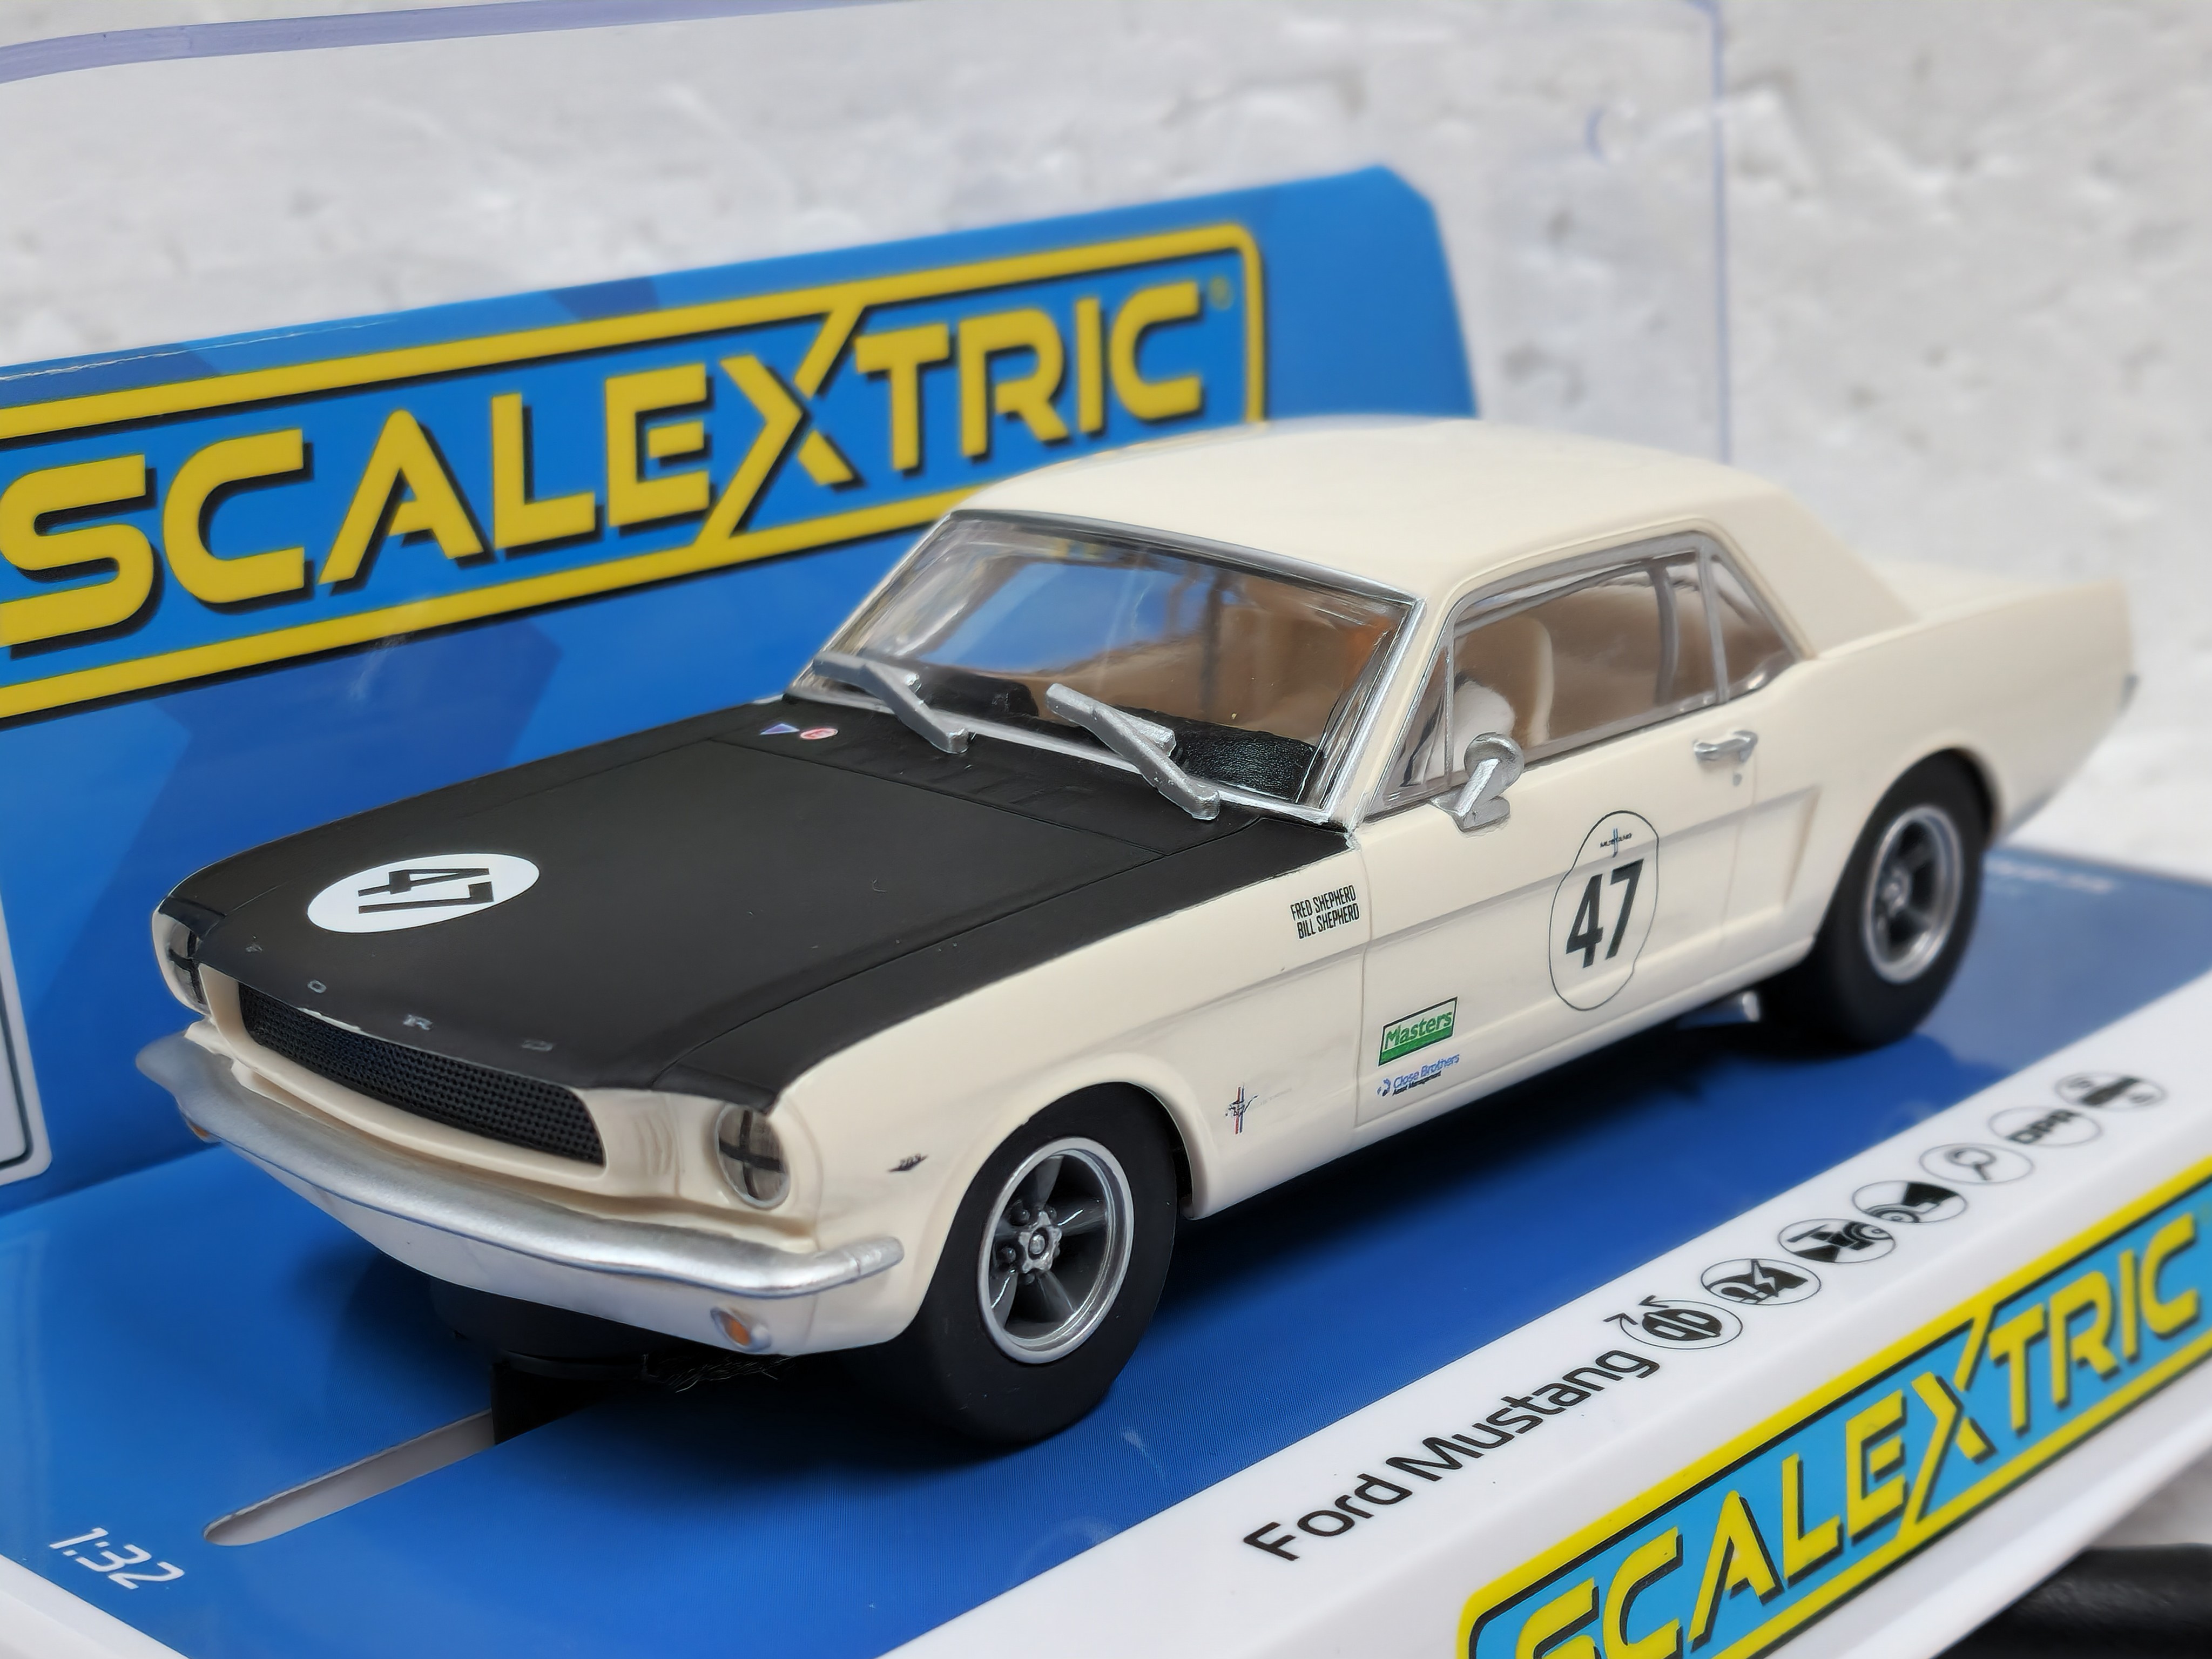 C4353 Scalextric Ford Mustang Goodwood Revival, #47 1:32 Slot Car